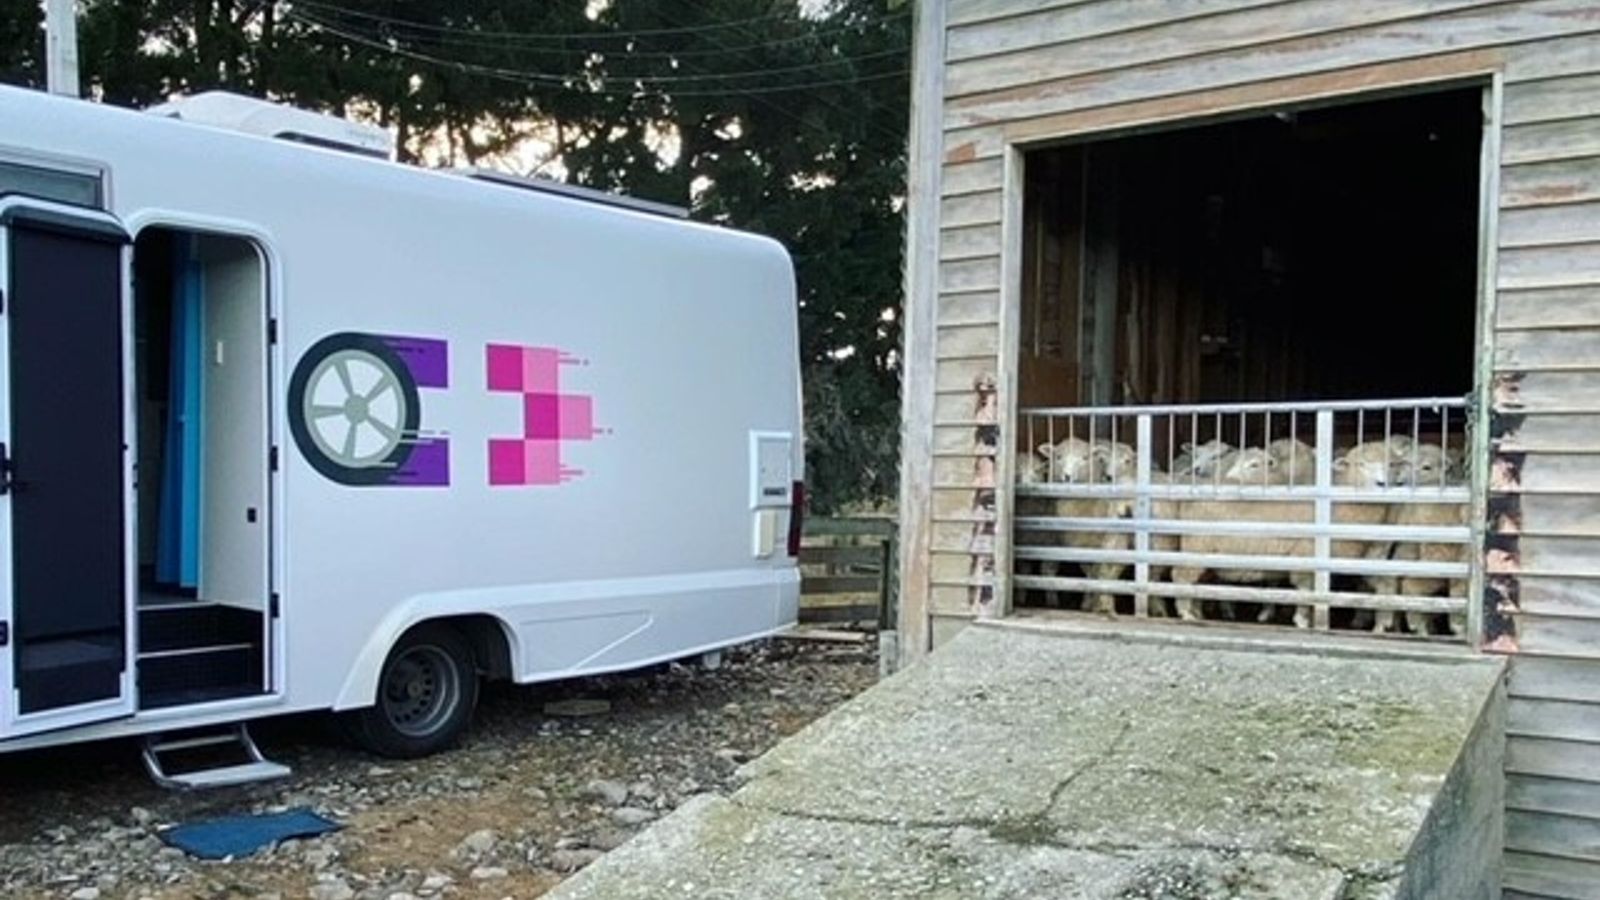 An image of the mobile cervical testing bus parked next to the sheep shearing shed